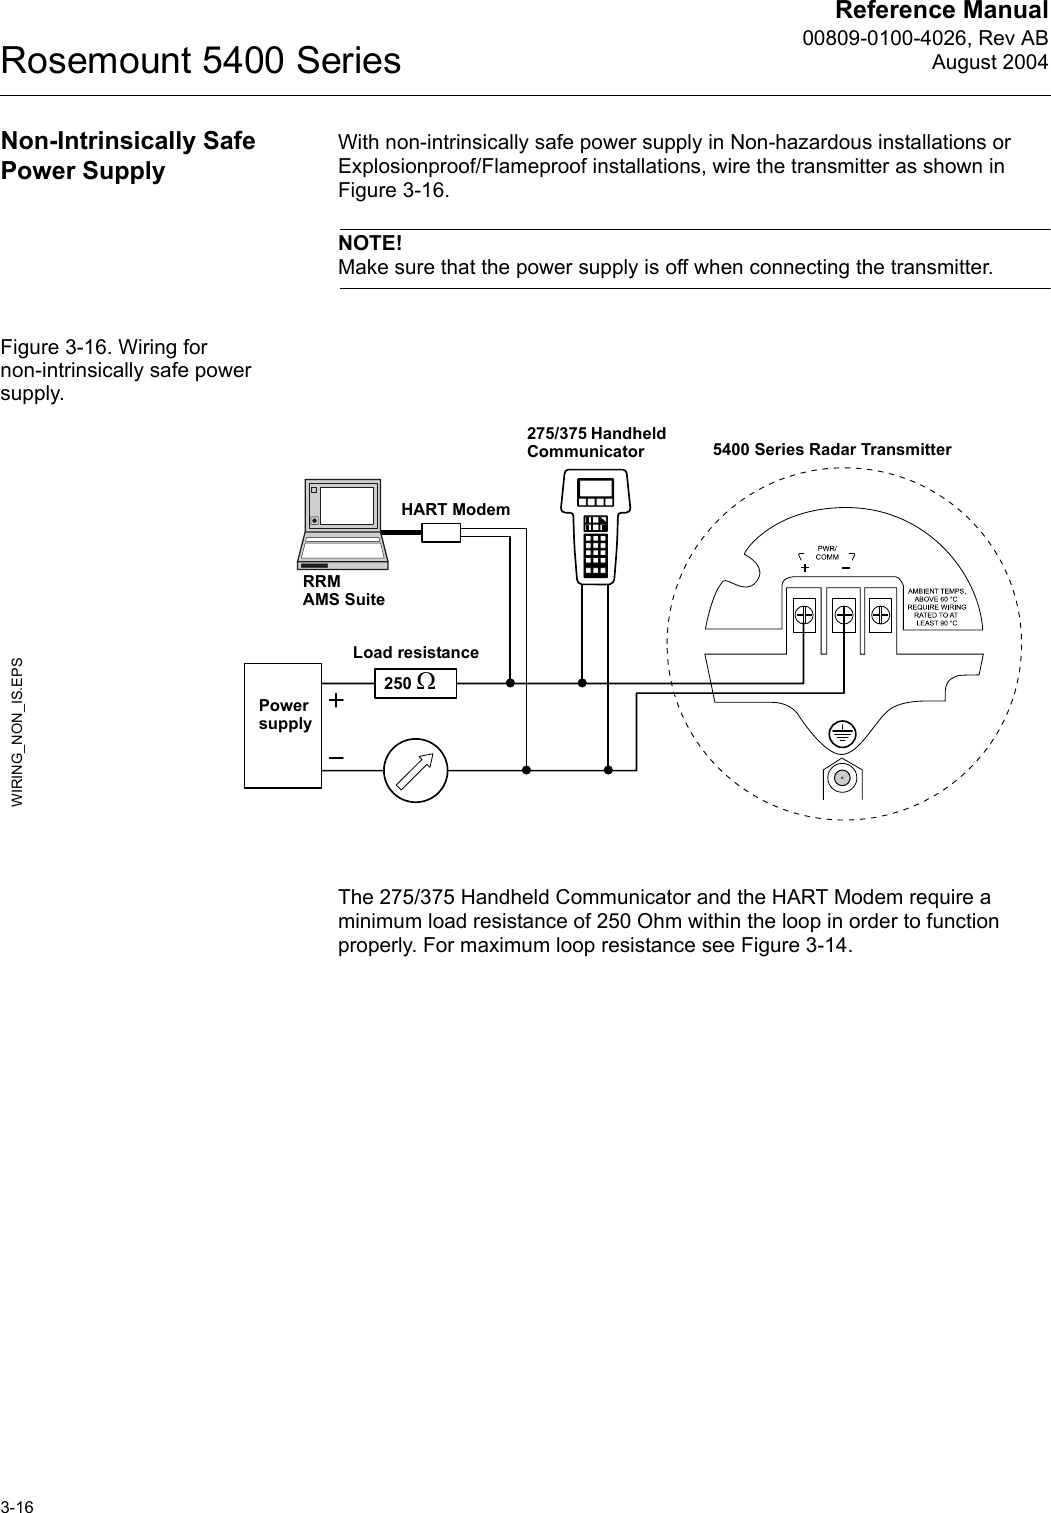 Reference Manual00809-0100-4026, Rev ABAugust 2004Rosemount 5400 Series3-16Non-Intrinsically Safe Power SupplyWith non-intrinsically safe power supply in Non-hazardous installations or Explosionproof/Flameproof installations, wire the transmitter as shown in Figure 3-16. NOTE!Make sure that the power supply is off when connecting the transmitter.Figure 3-16. Wiring for non-intrinsically safe power supply.The 275/375 Handheld Communicator and the HART Modem require a minimum load resistance of 250 Ohm within the loop in order to function properly. For maximum loop resistance see Figure 3-14.Power supplyWIRING_NON_IS.EPS275/375 Handheld CommunicatorLoad resistanceHART Modem5400 Series Radar TransmitterRRMAMS Suite 250 Ω